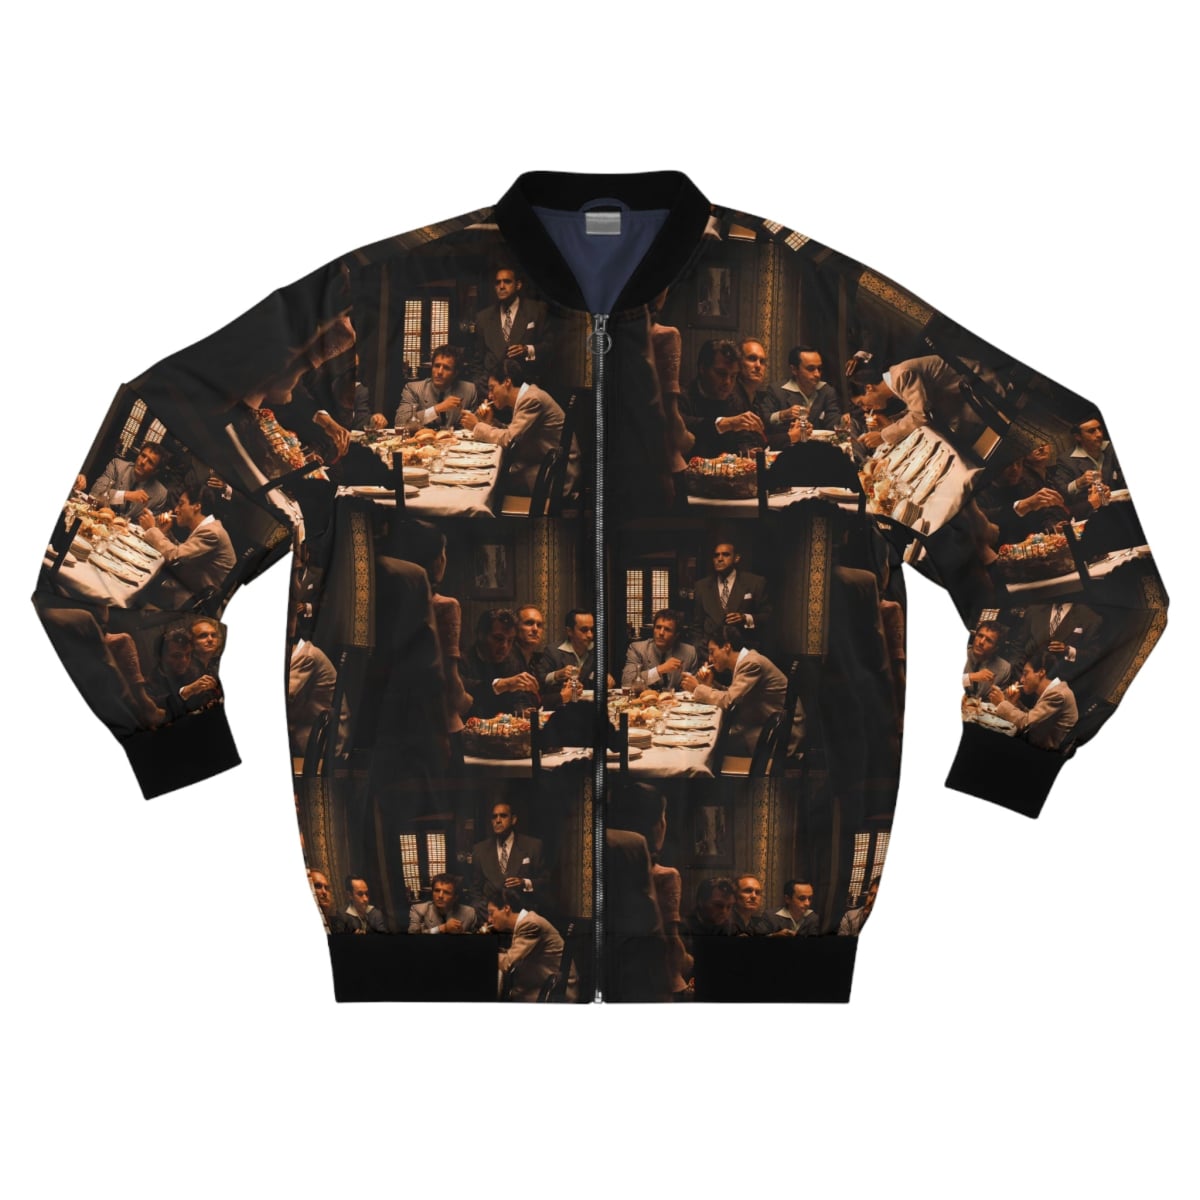 The Best Mobster Movie of All Time Bomber Jacket